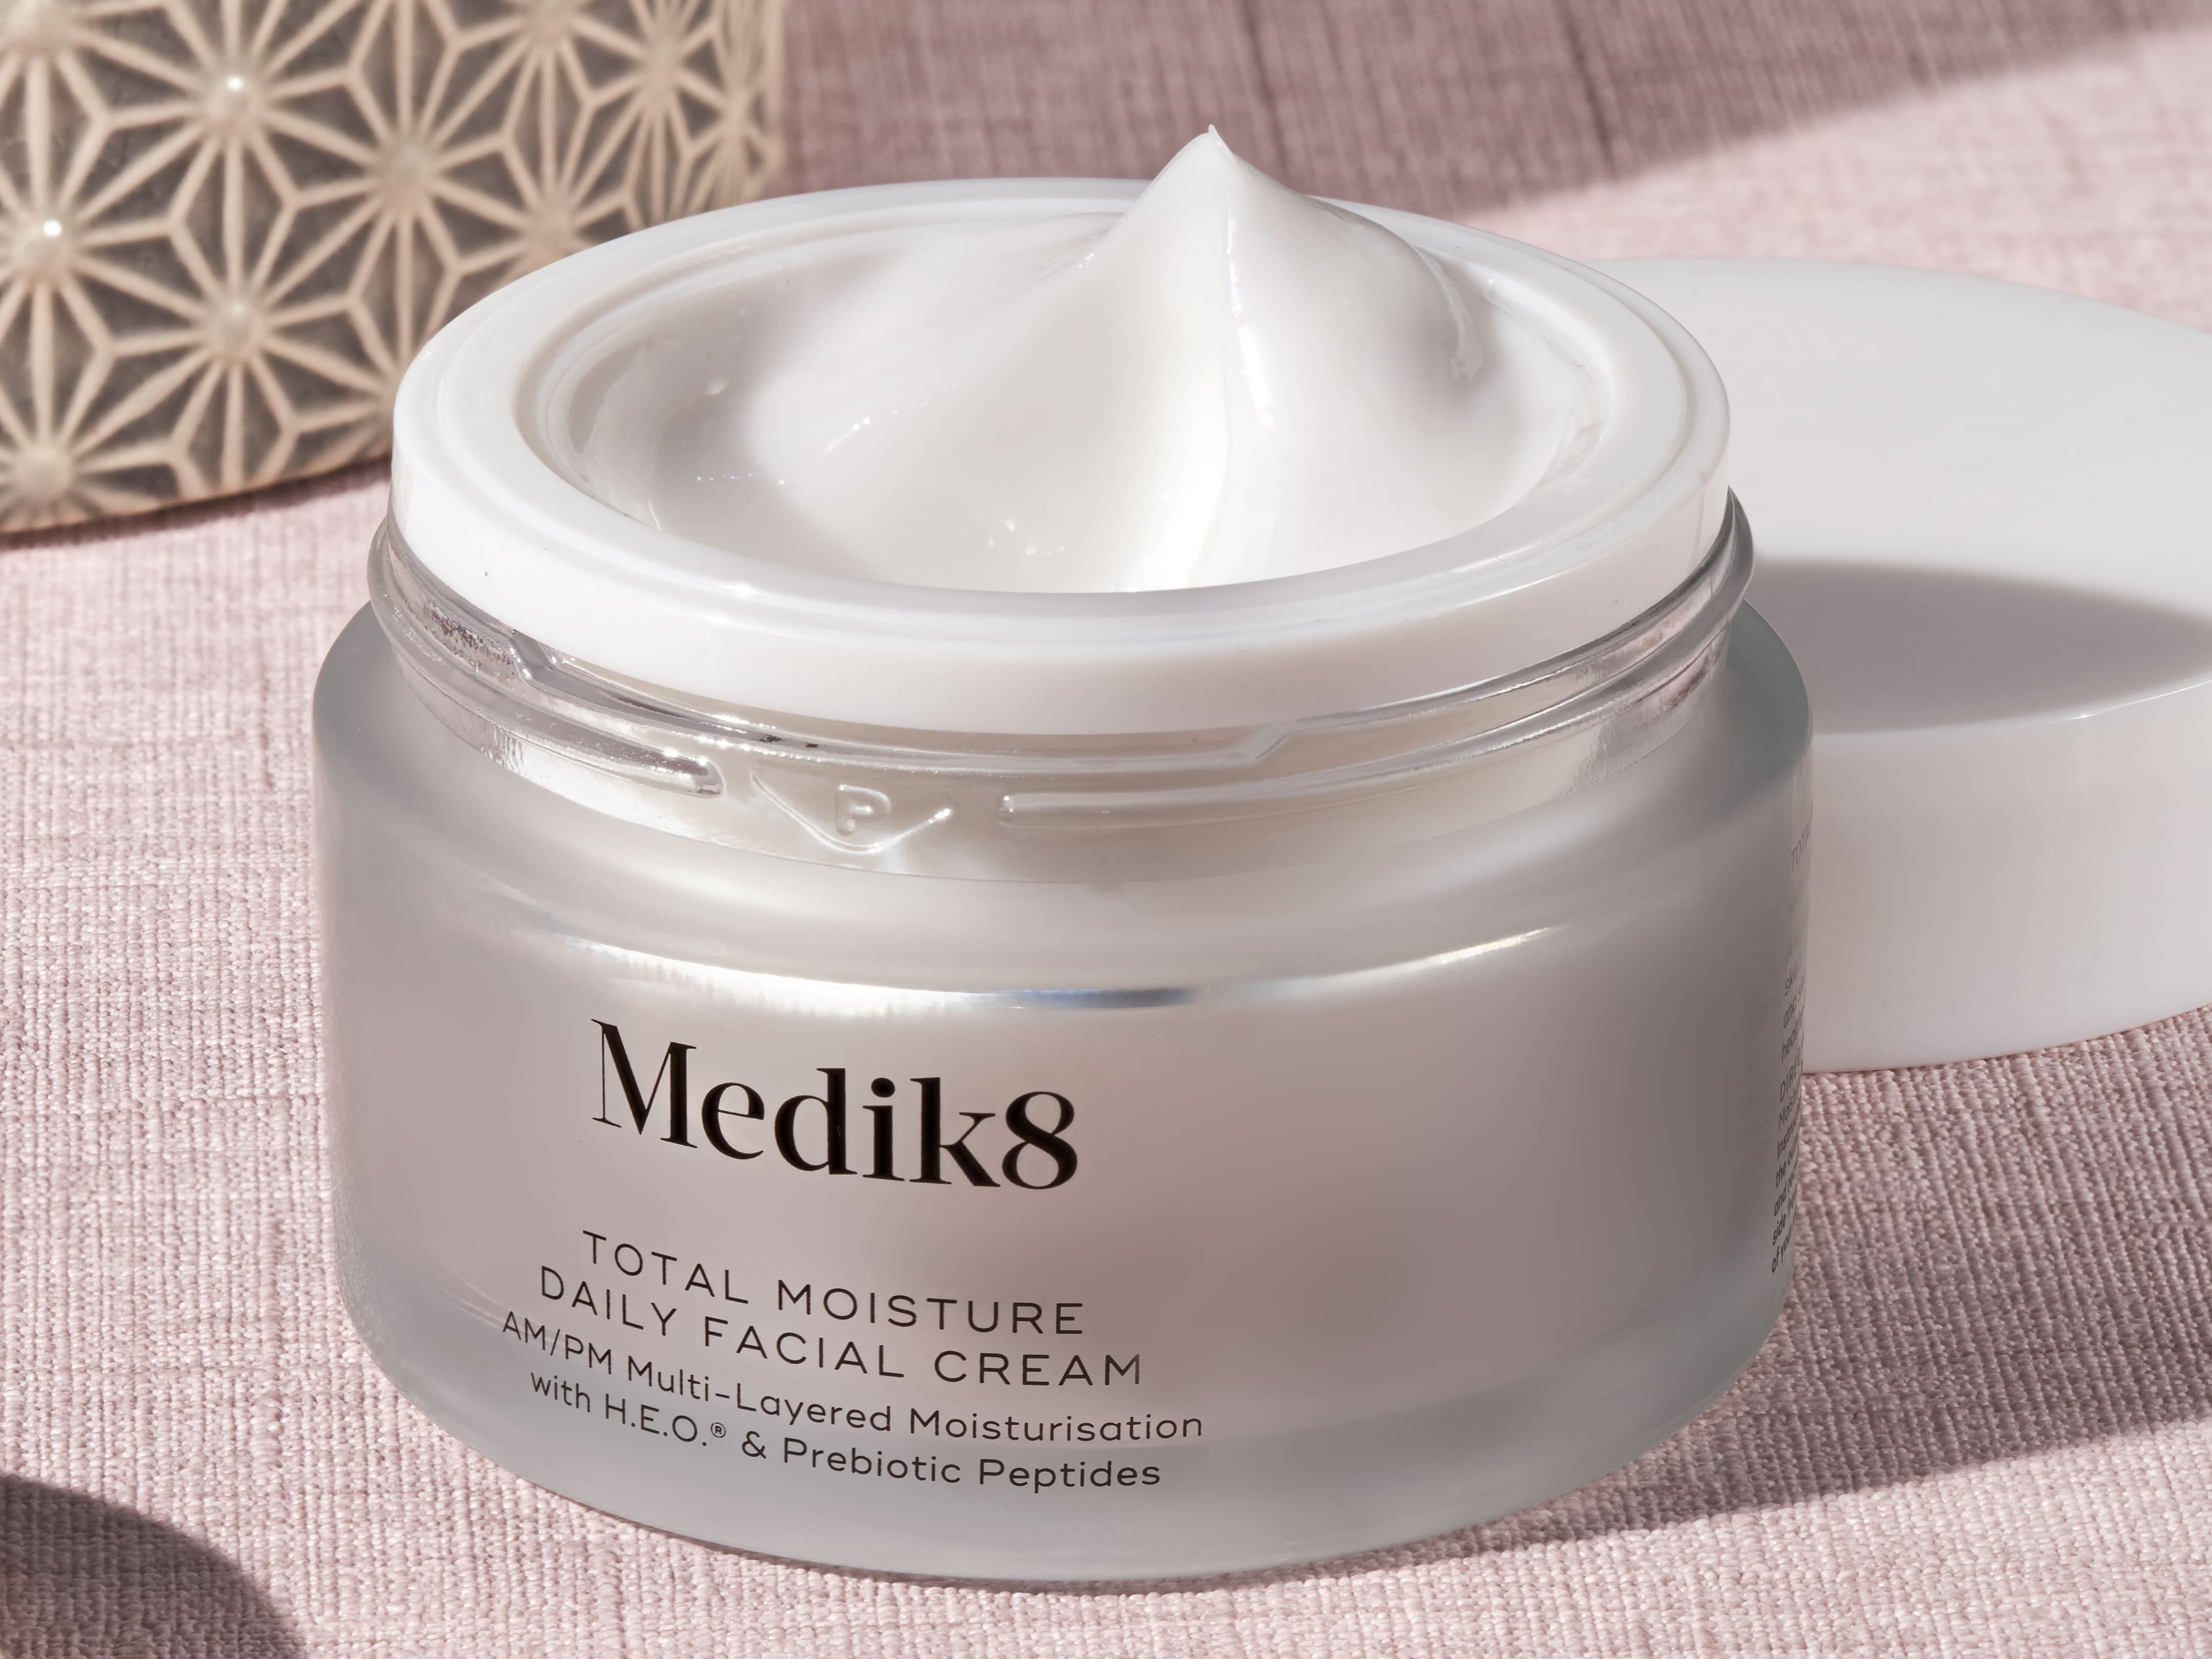 Our Review of Medik8's New Face Cream